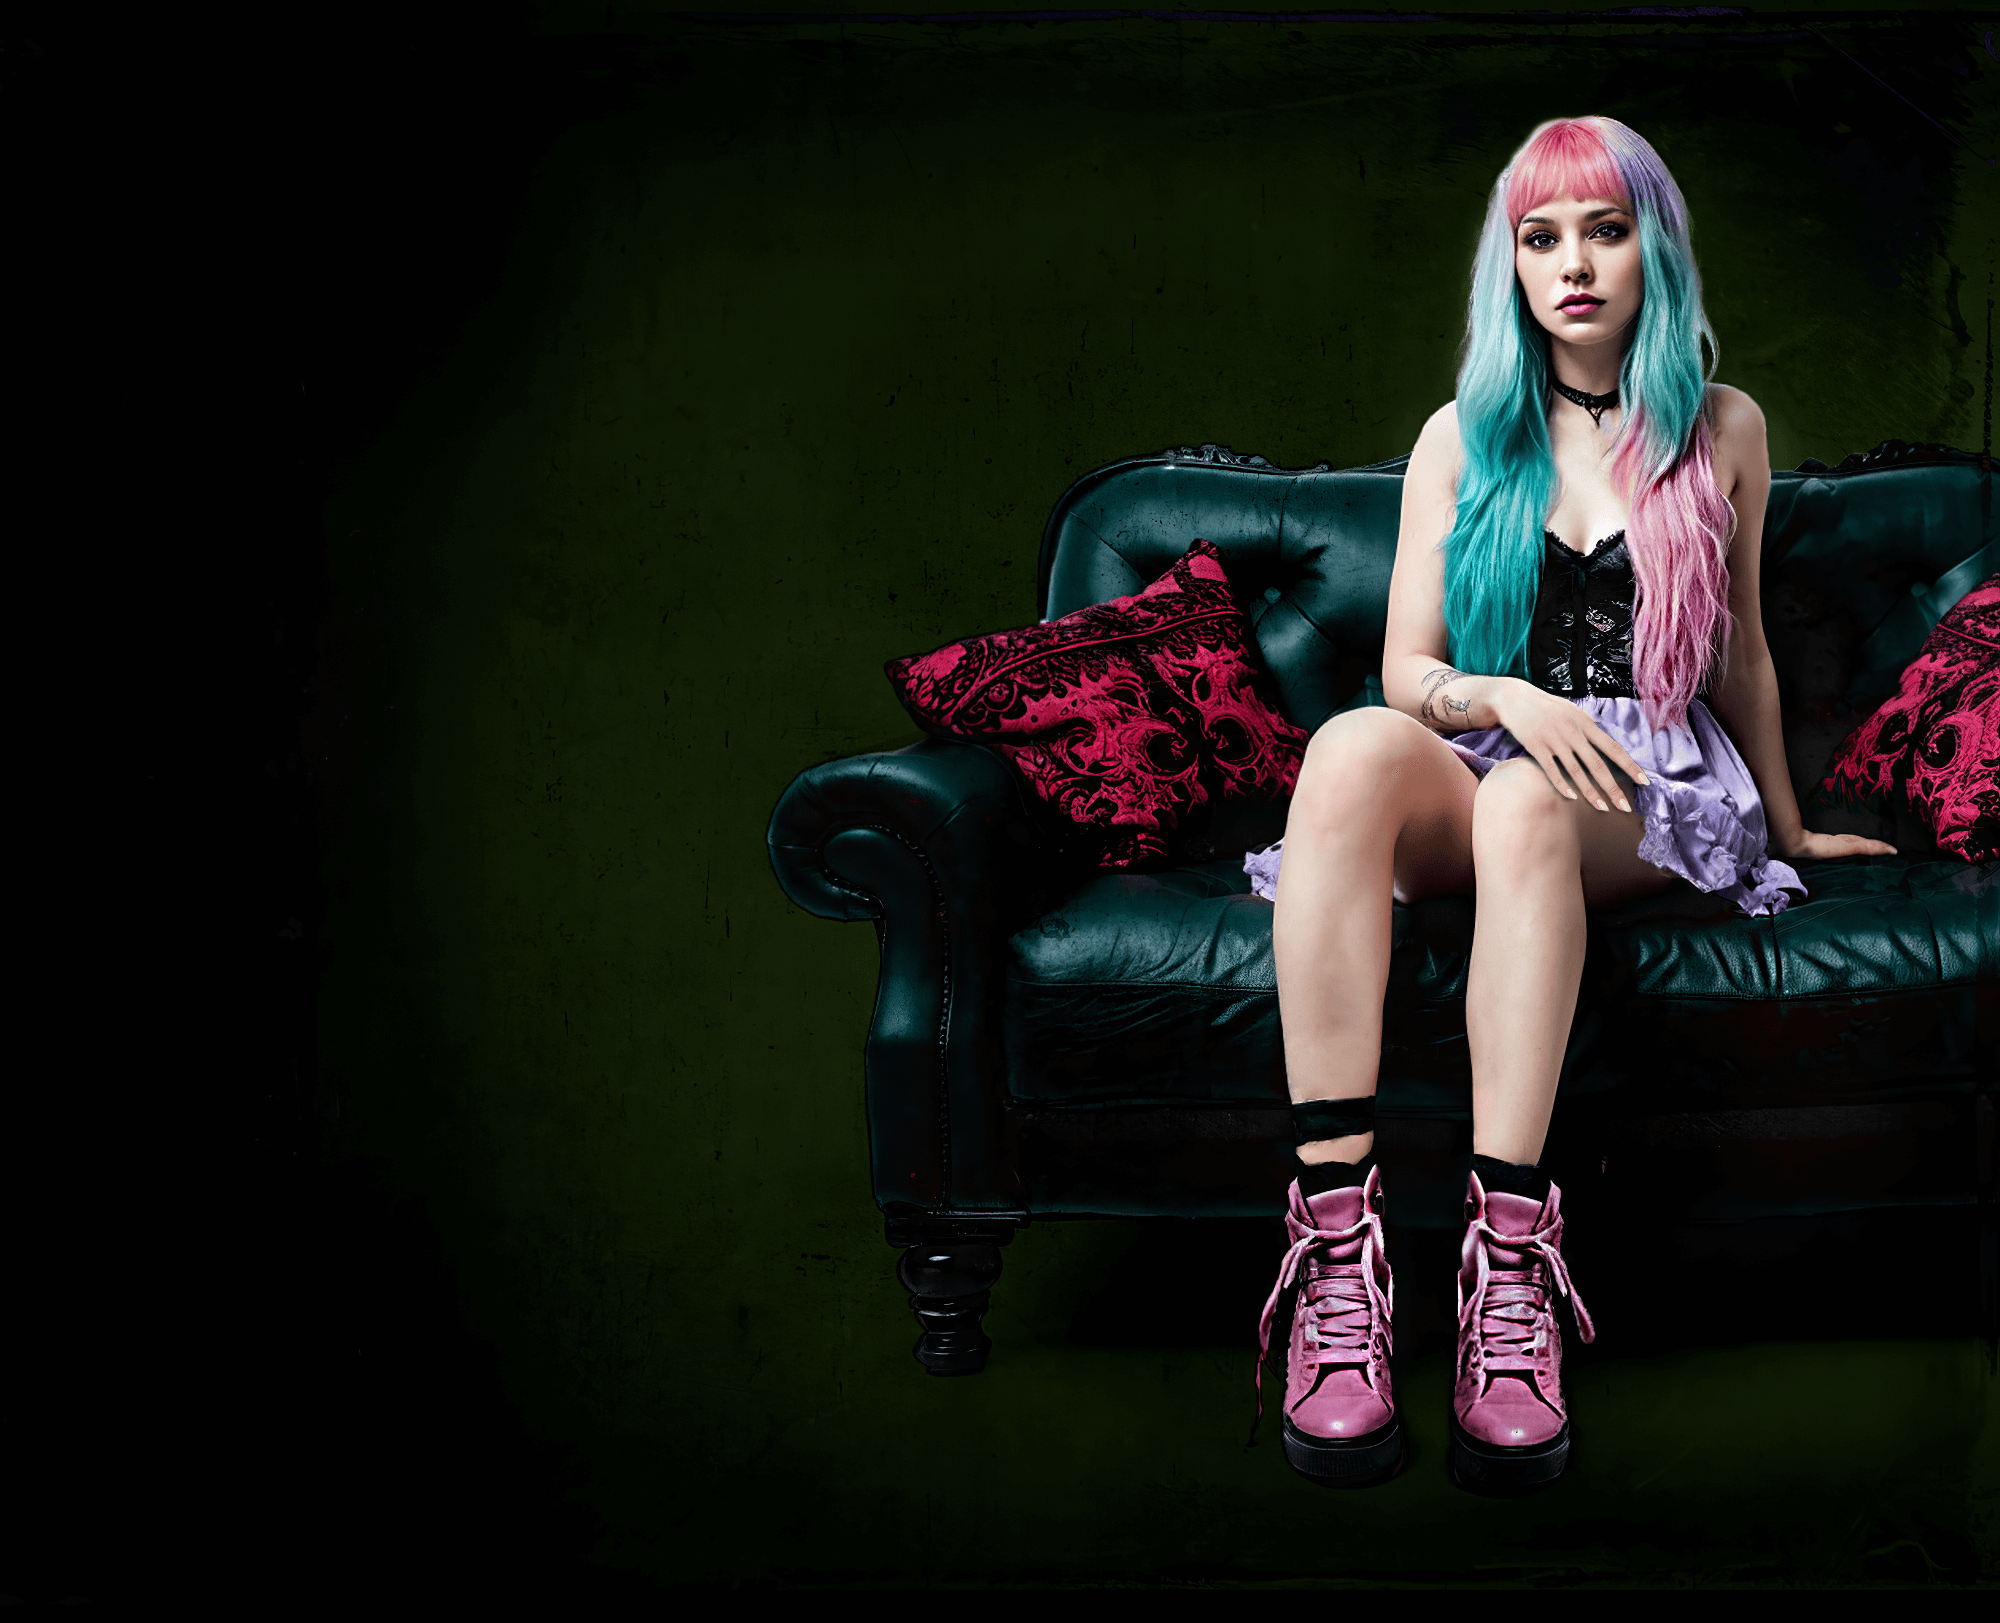 Woman with pink hair sits on couch in a gothic setting